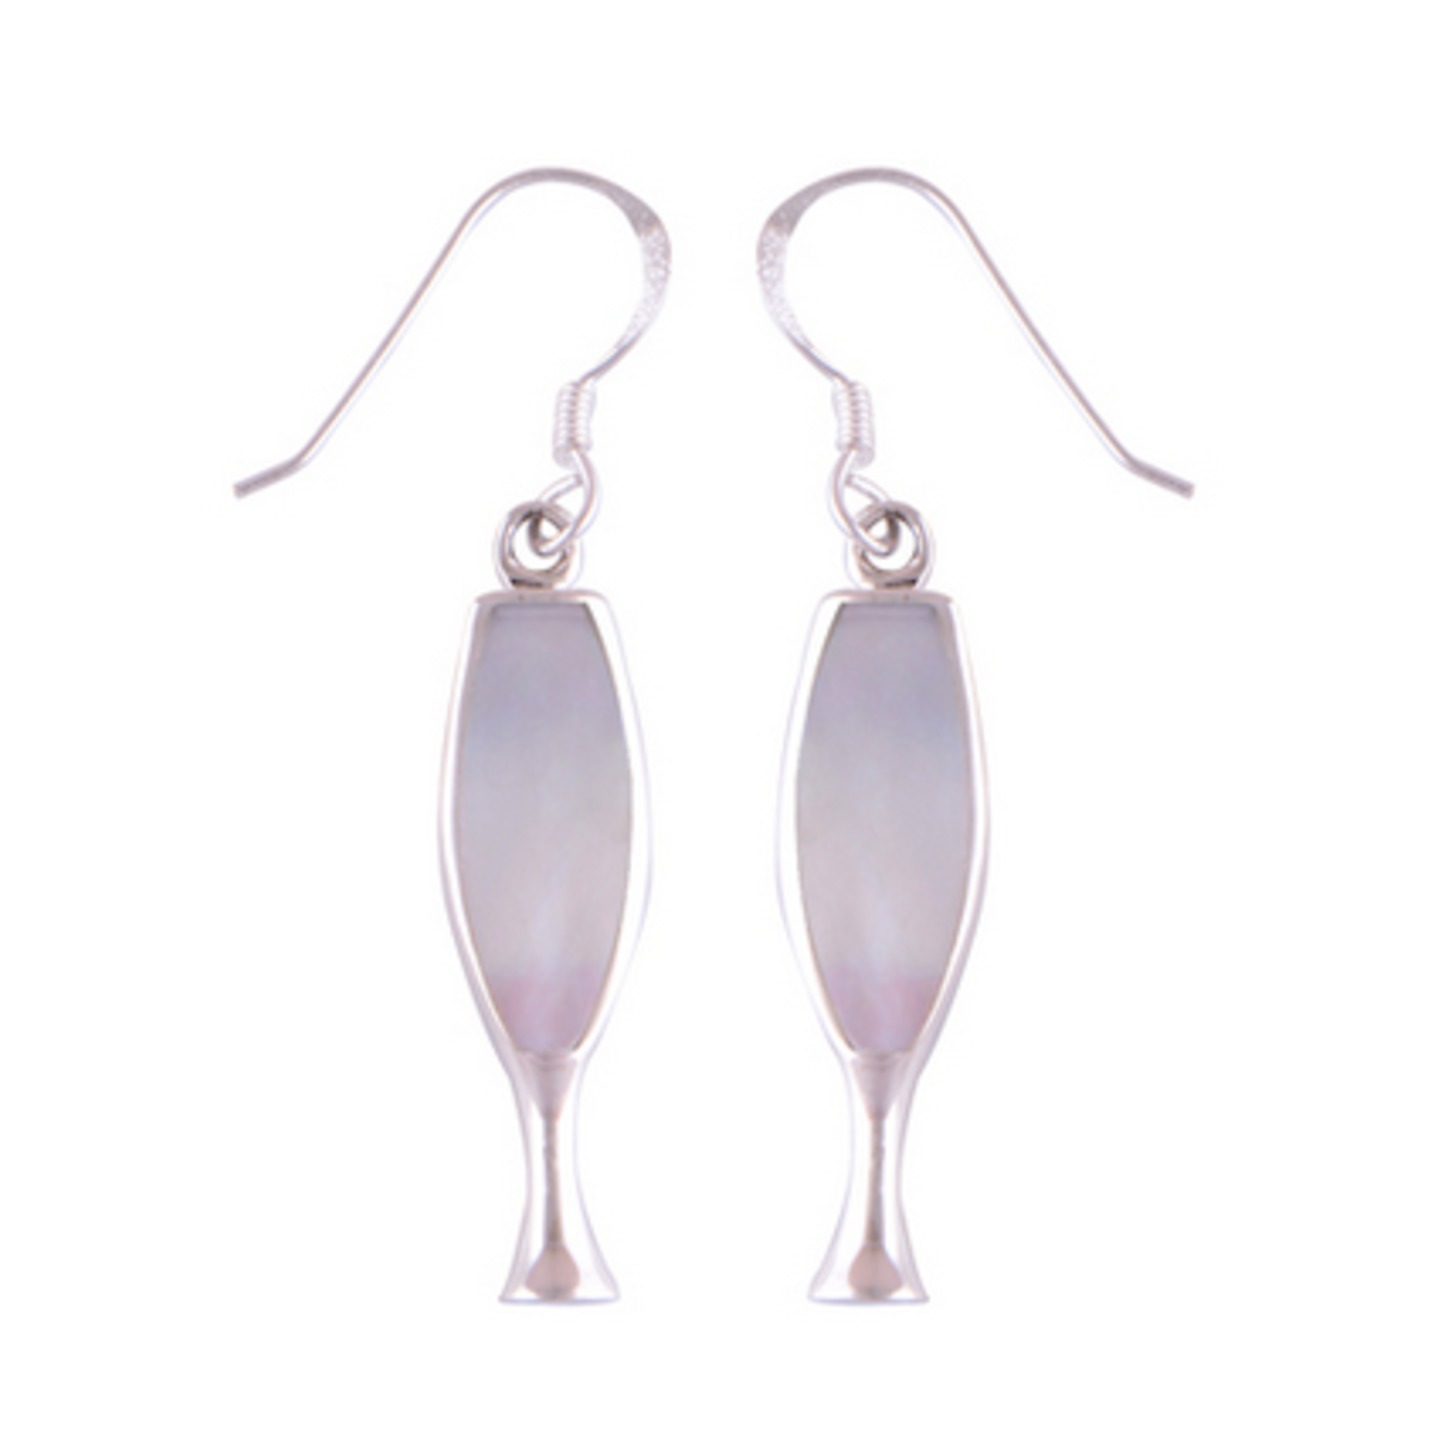 The Flute Silver Earring